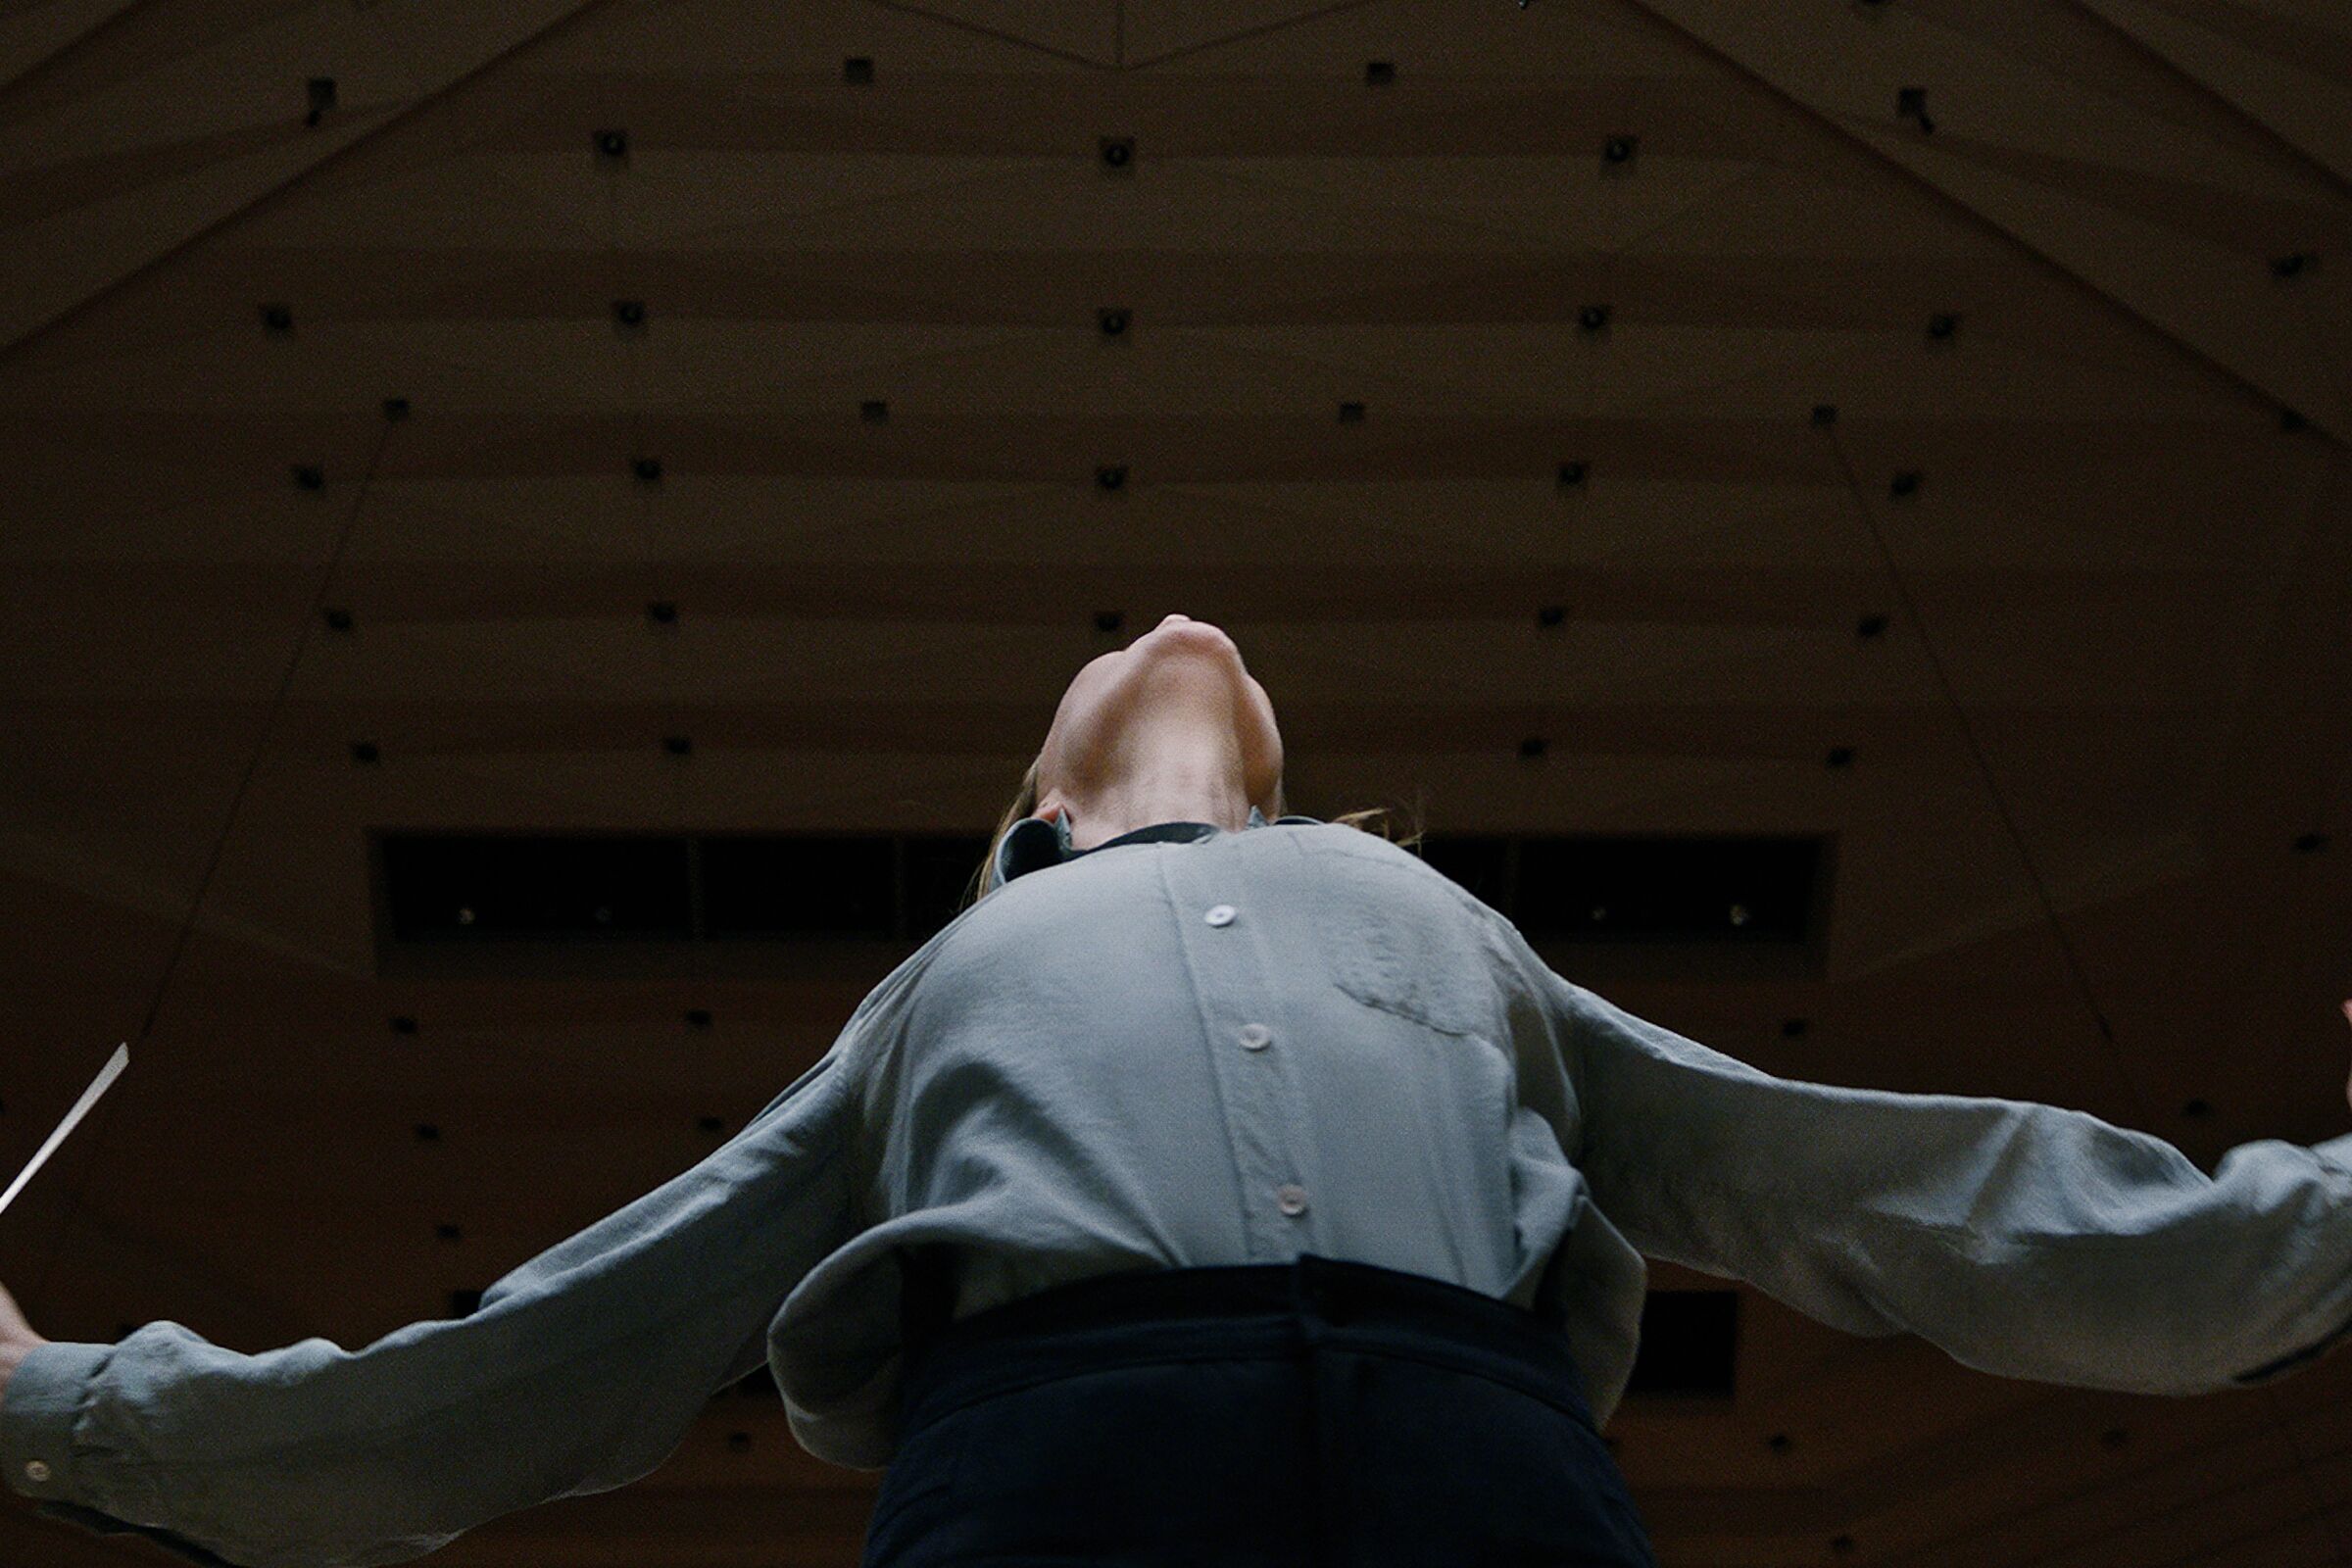 A woman conductor looks toward the ceiling, as seen from the floor below her looking up.